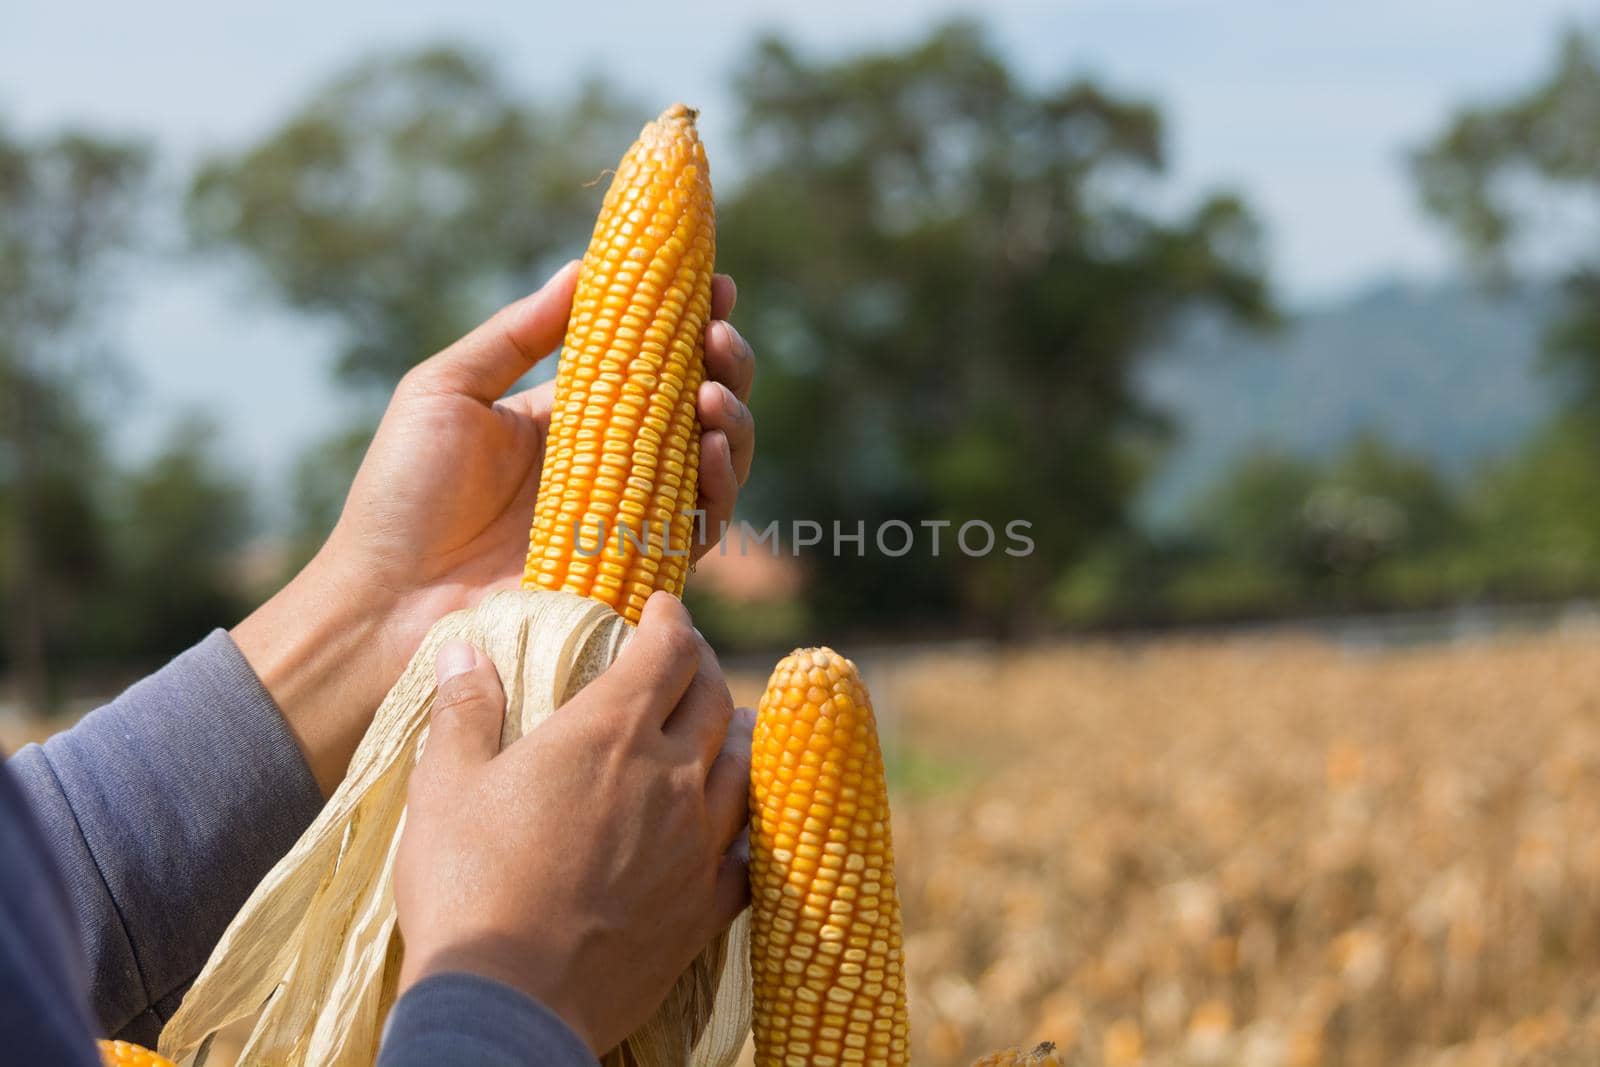 Closeup Ripe feed Corn Cob Hold in Hand of Farmer or Cultivator in Dry Corn Field by thampapon